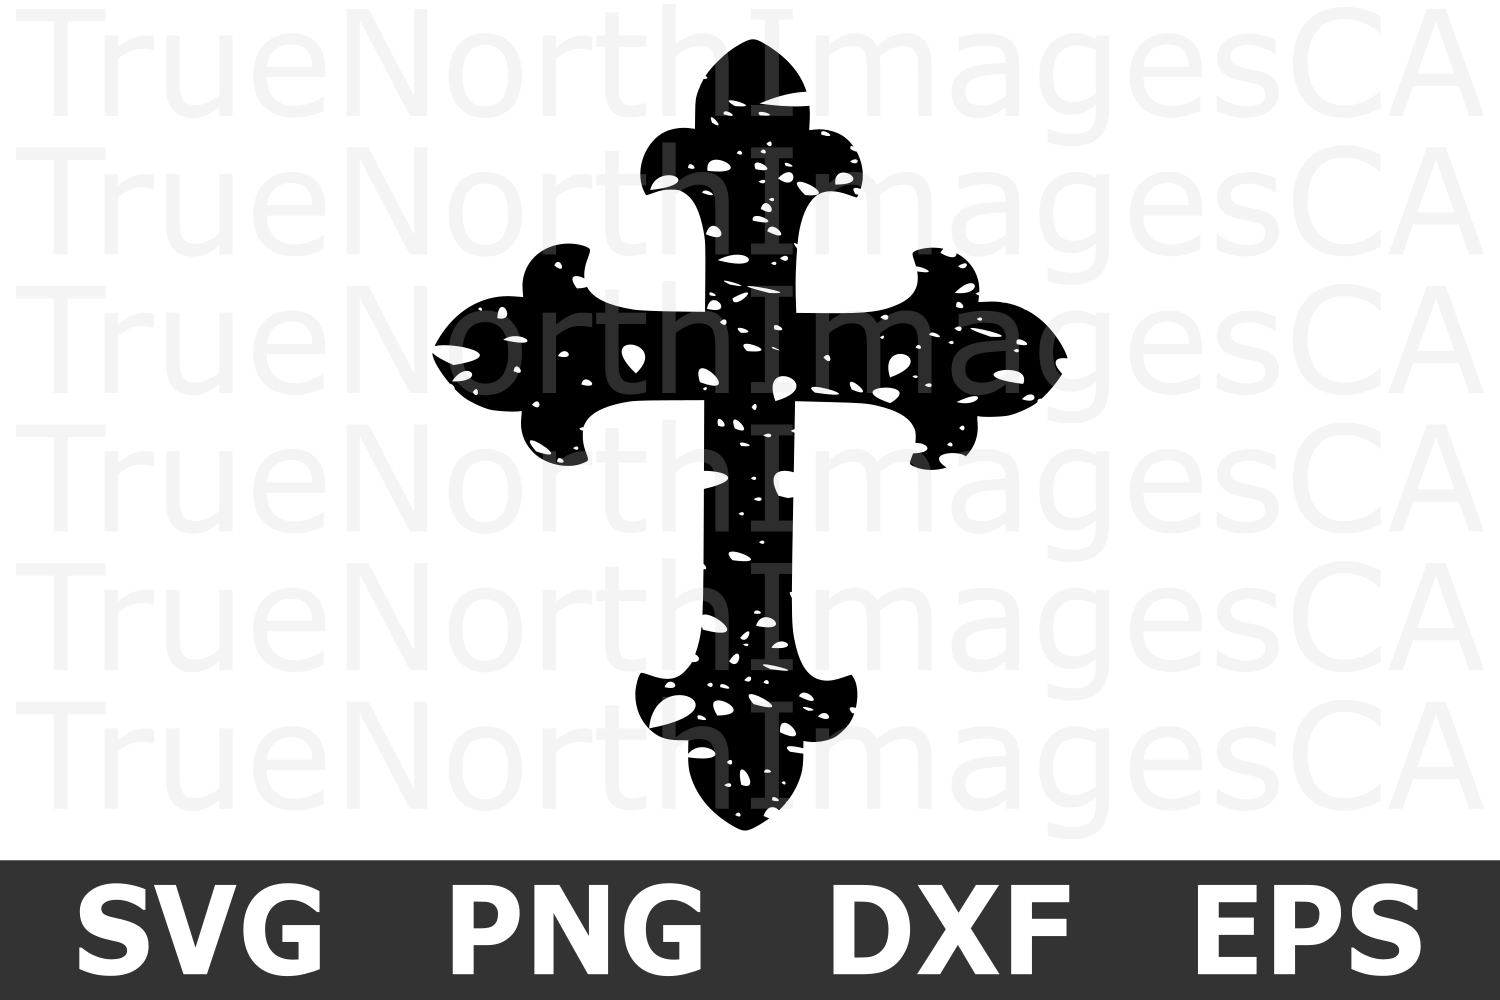 Distressed Cross - An Religious SVG Cut File